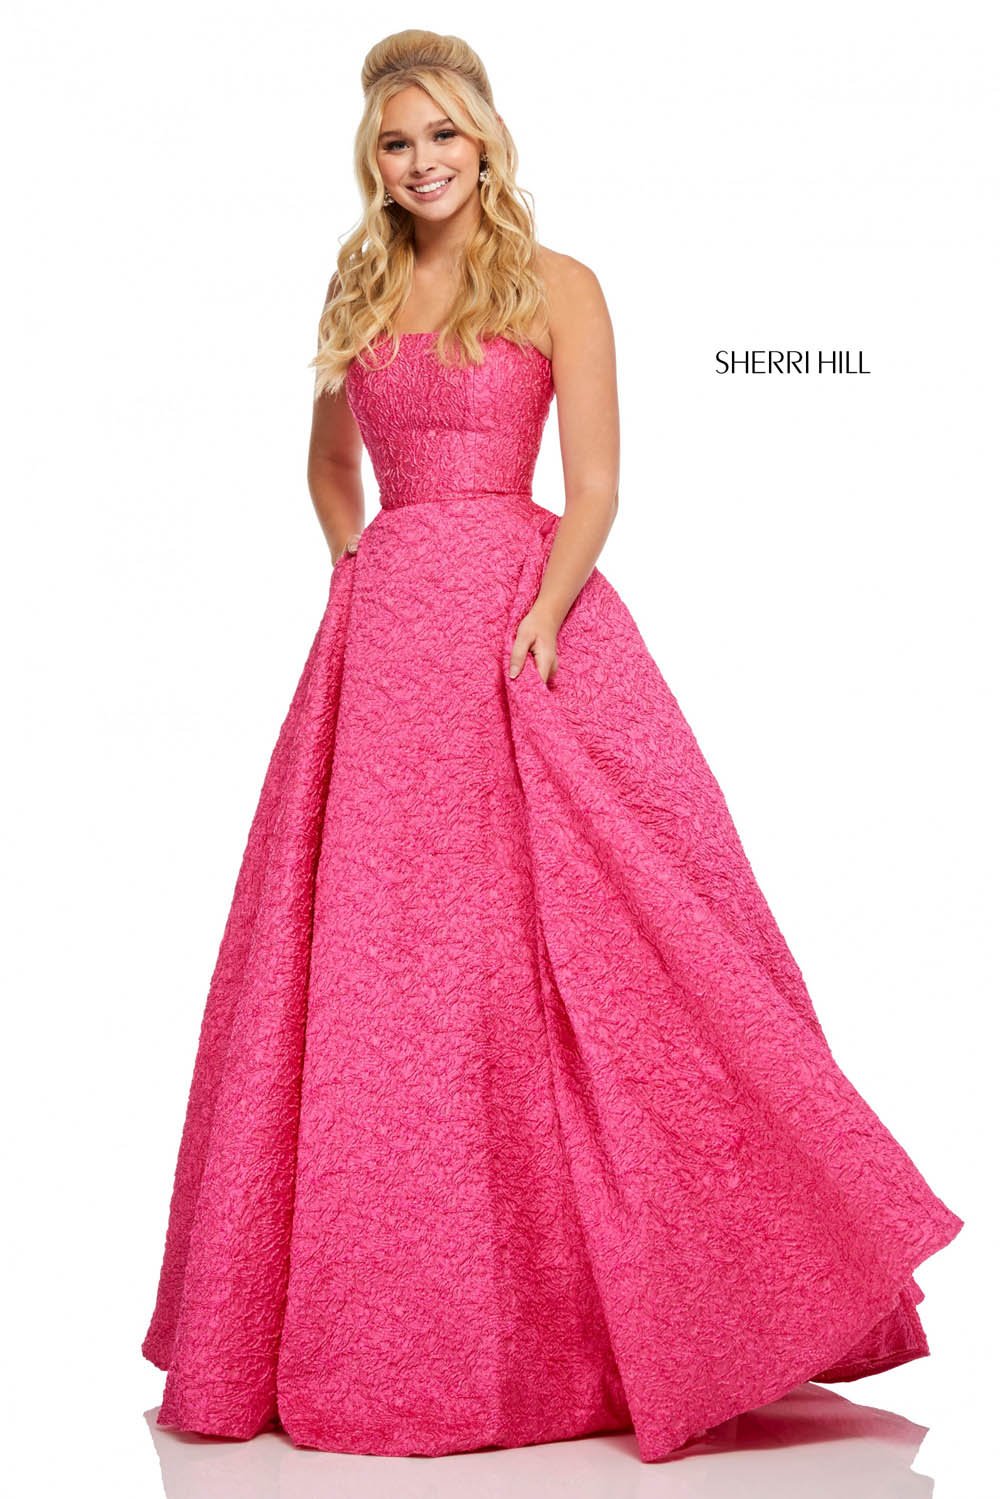 Sherri Hill 52681 dress images in these colors: Fuchsia, Periwinkle, Ivory, Black, Rose.